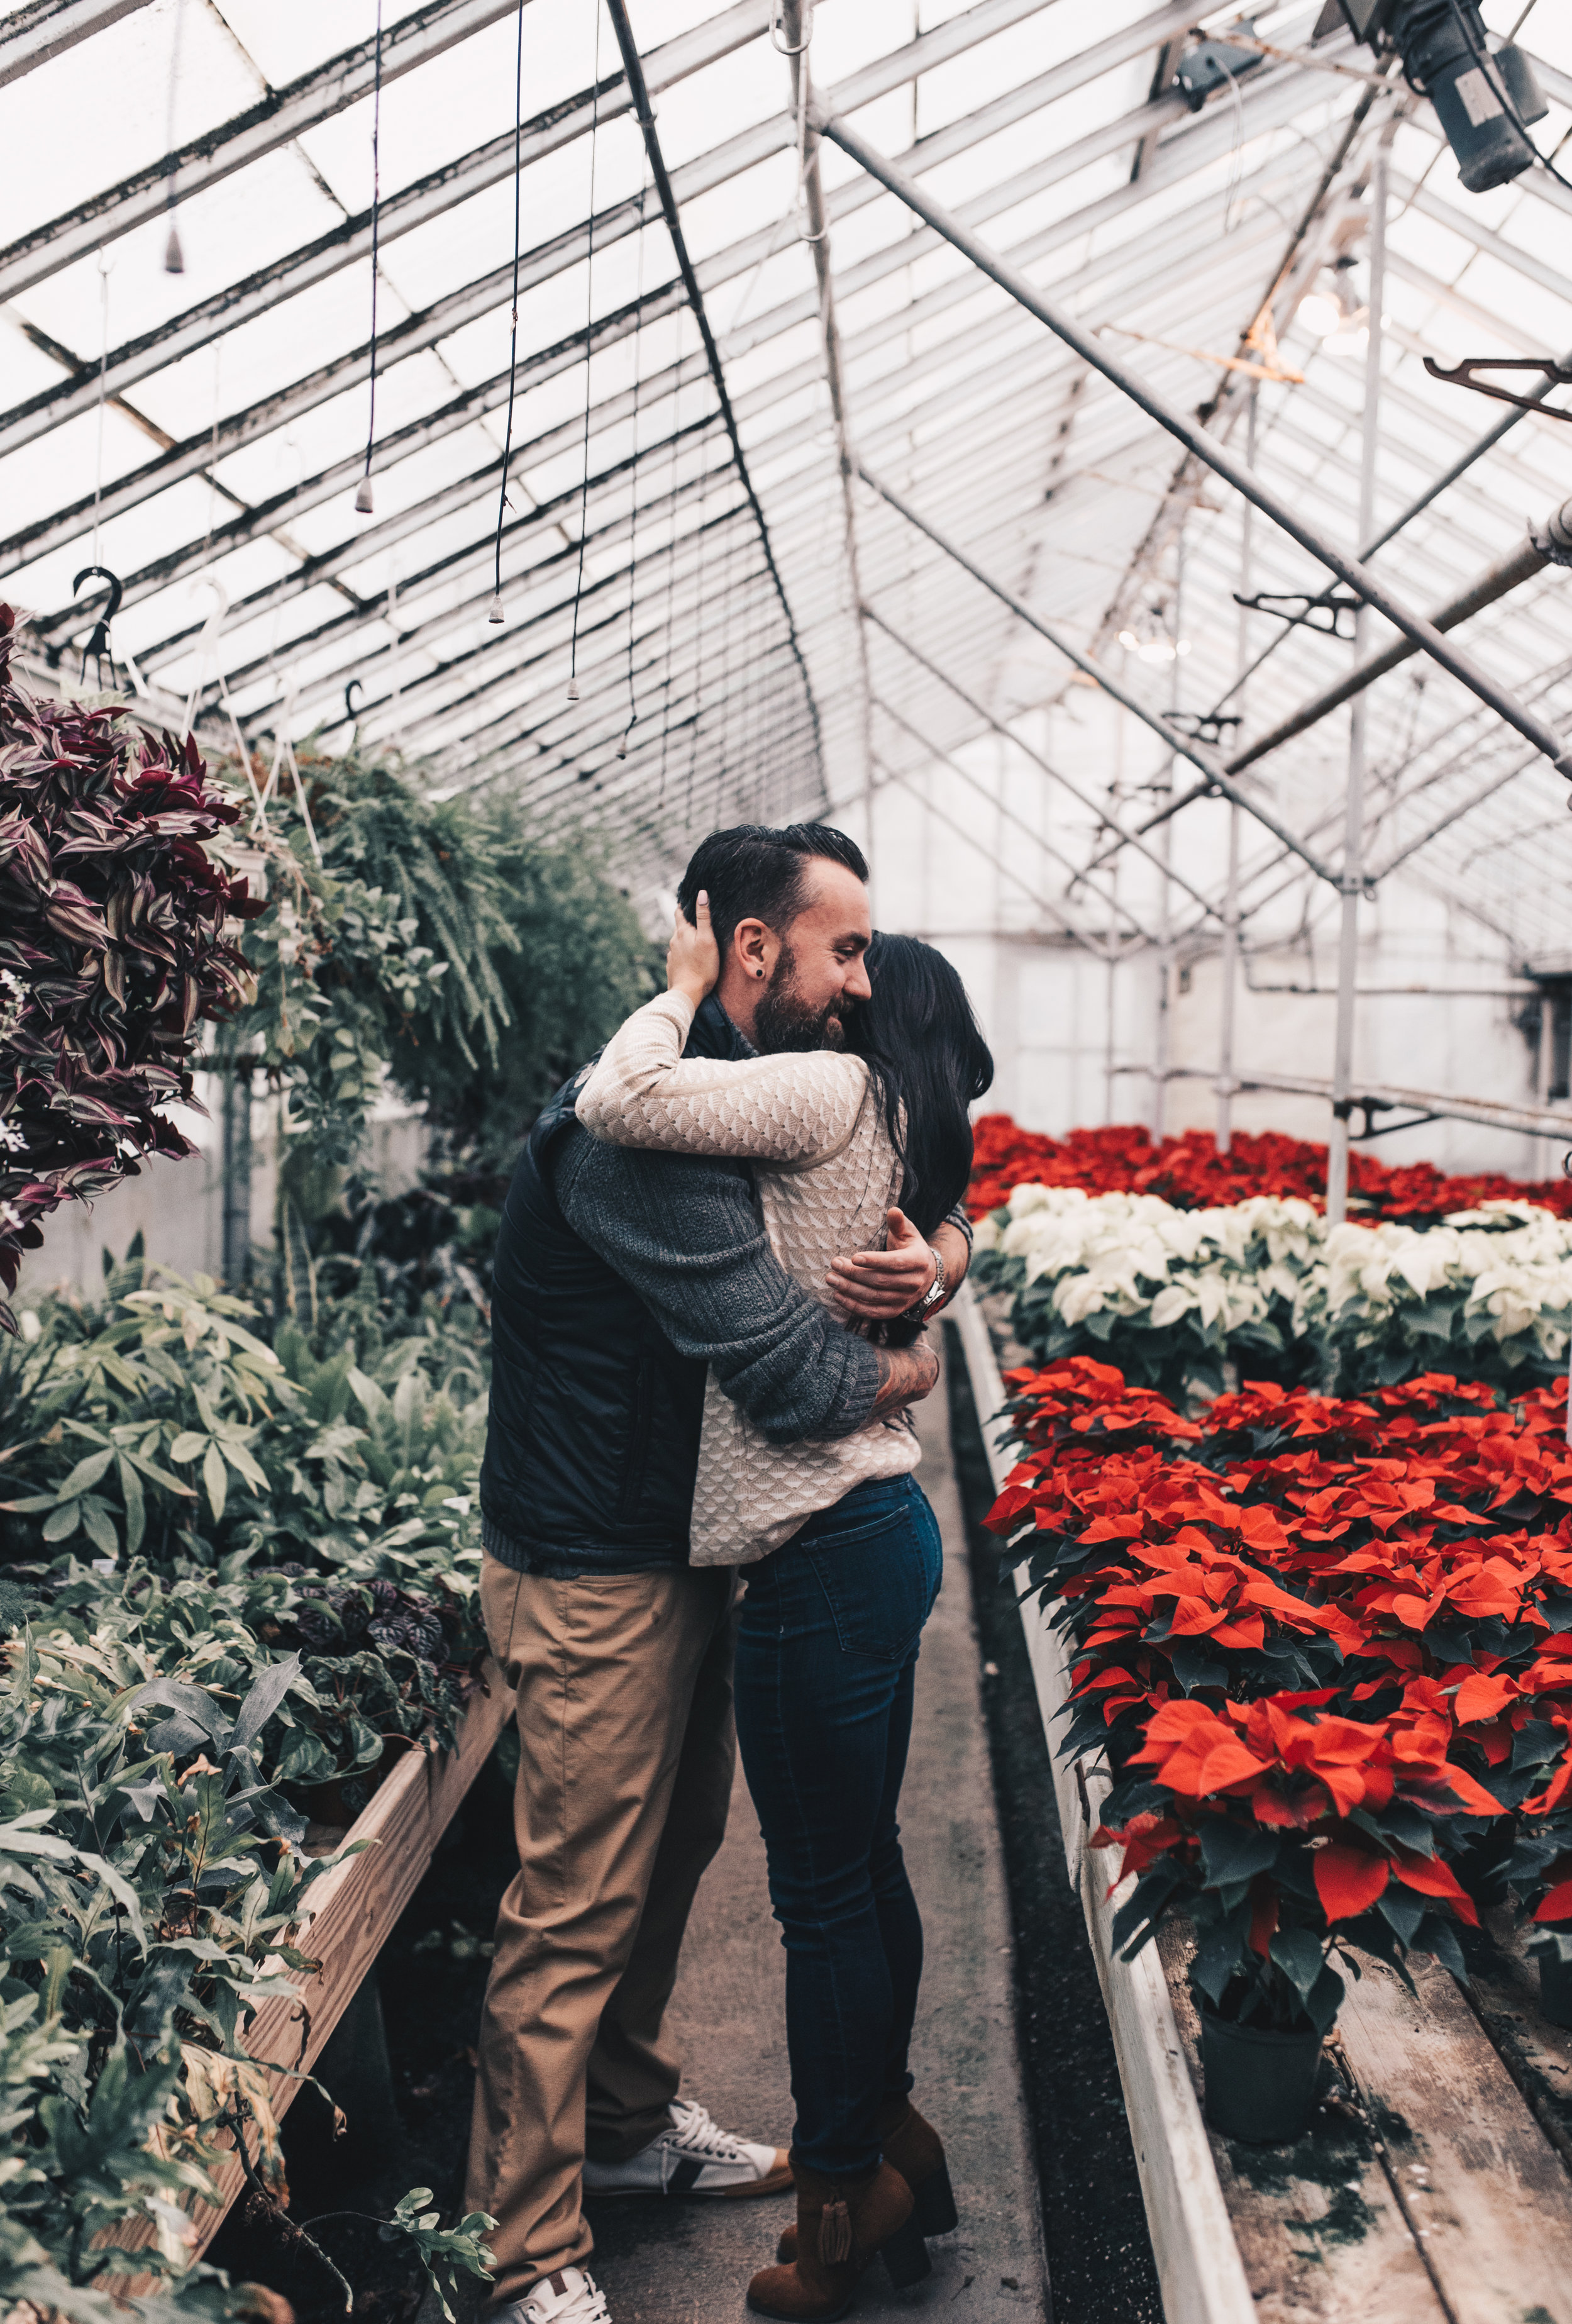 Greenhouse Couples Photography, Greenhouse Engagement Photography, Illinois Couples Photographer